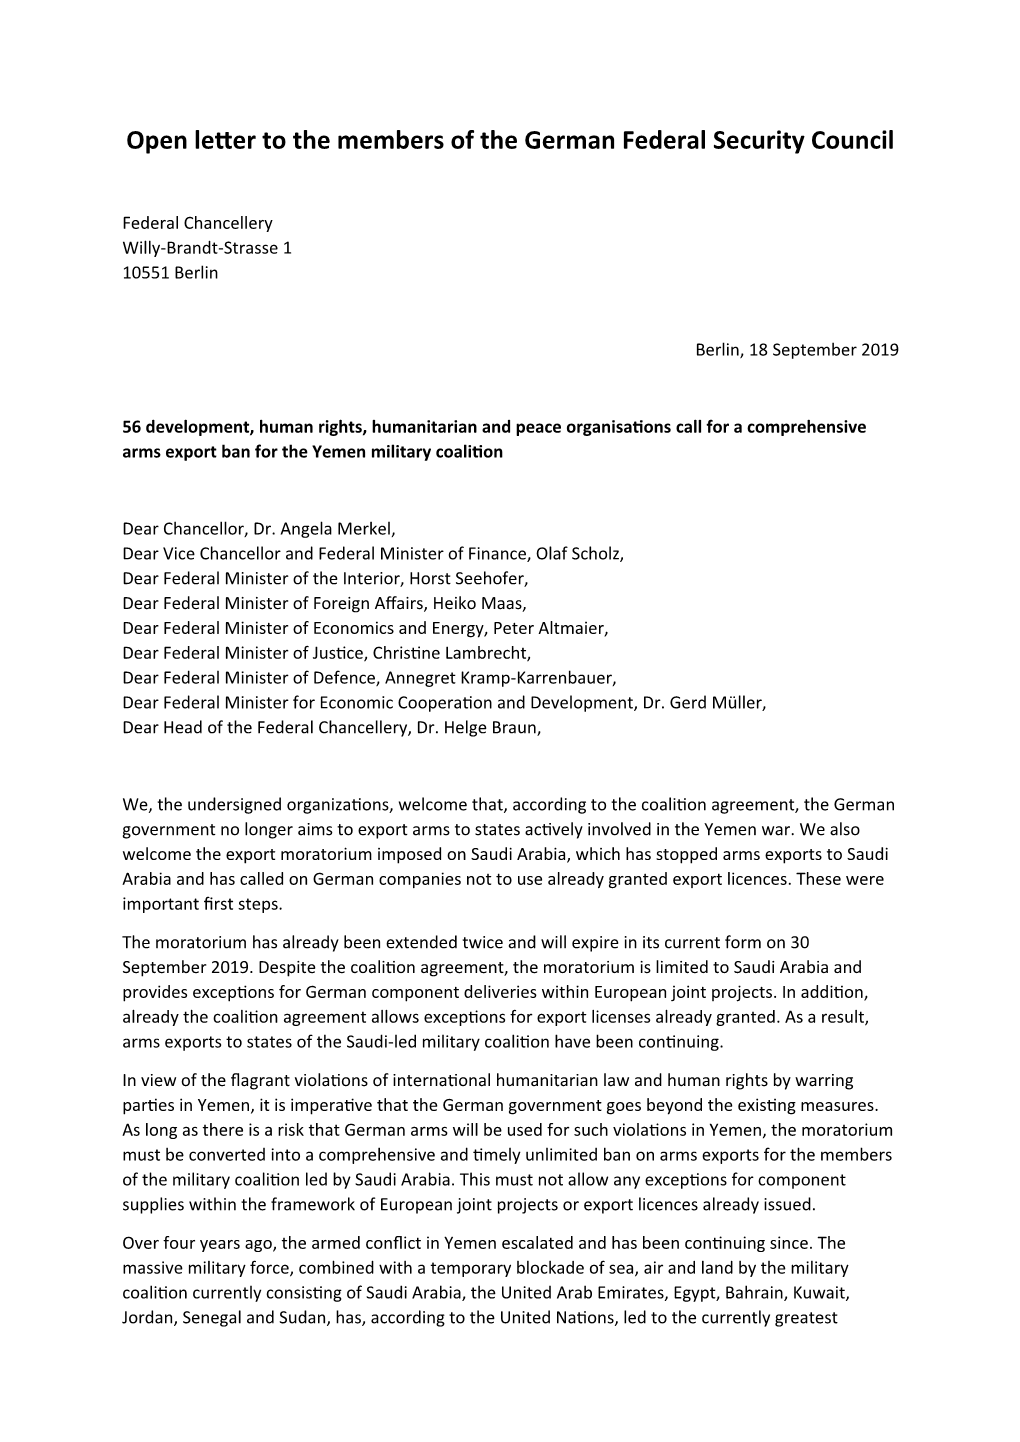 Open Letter to the Members of the German Federal Security Council